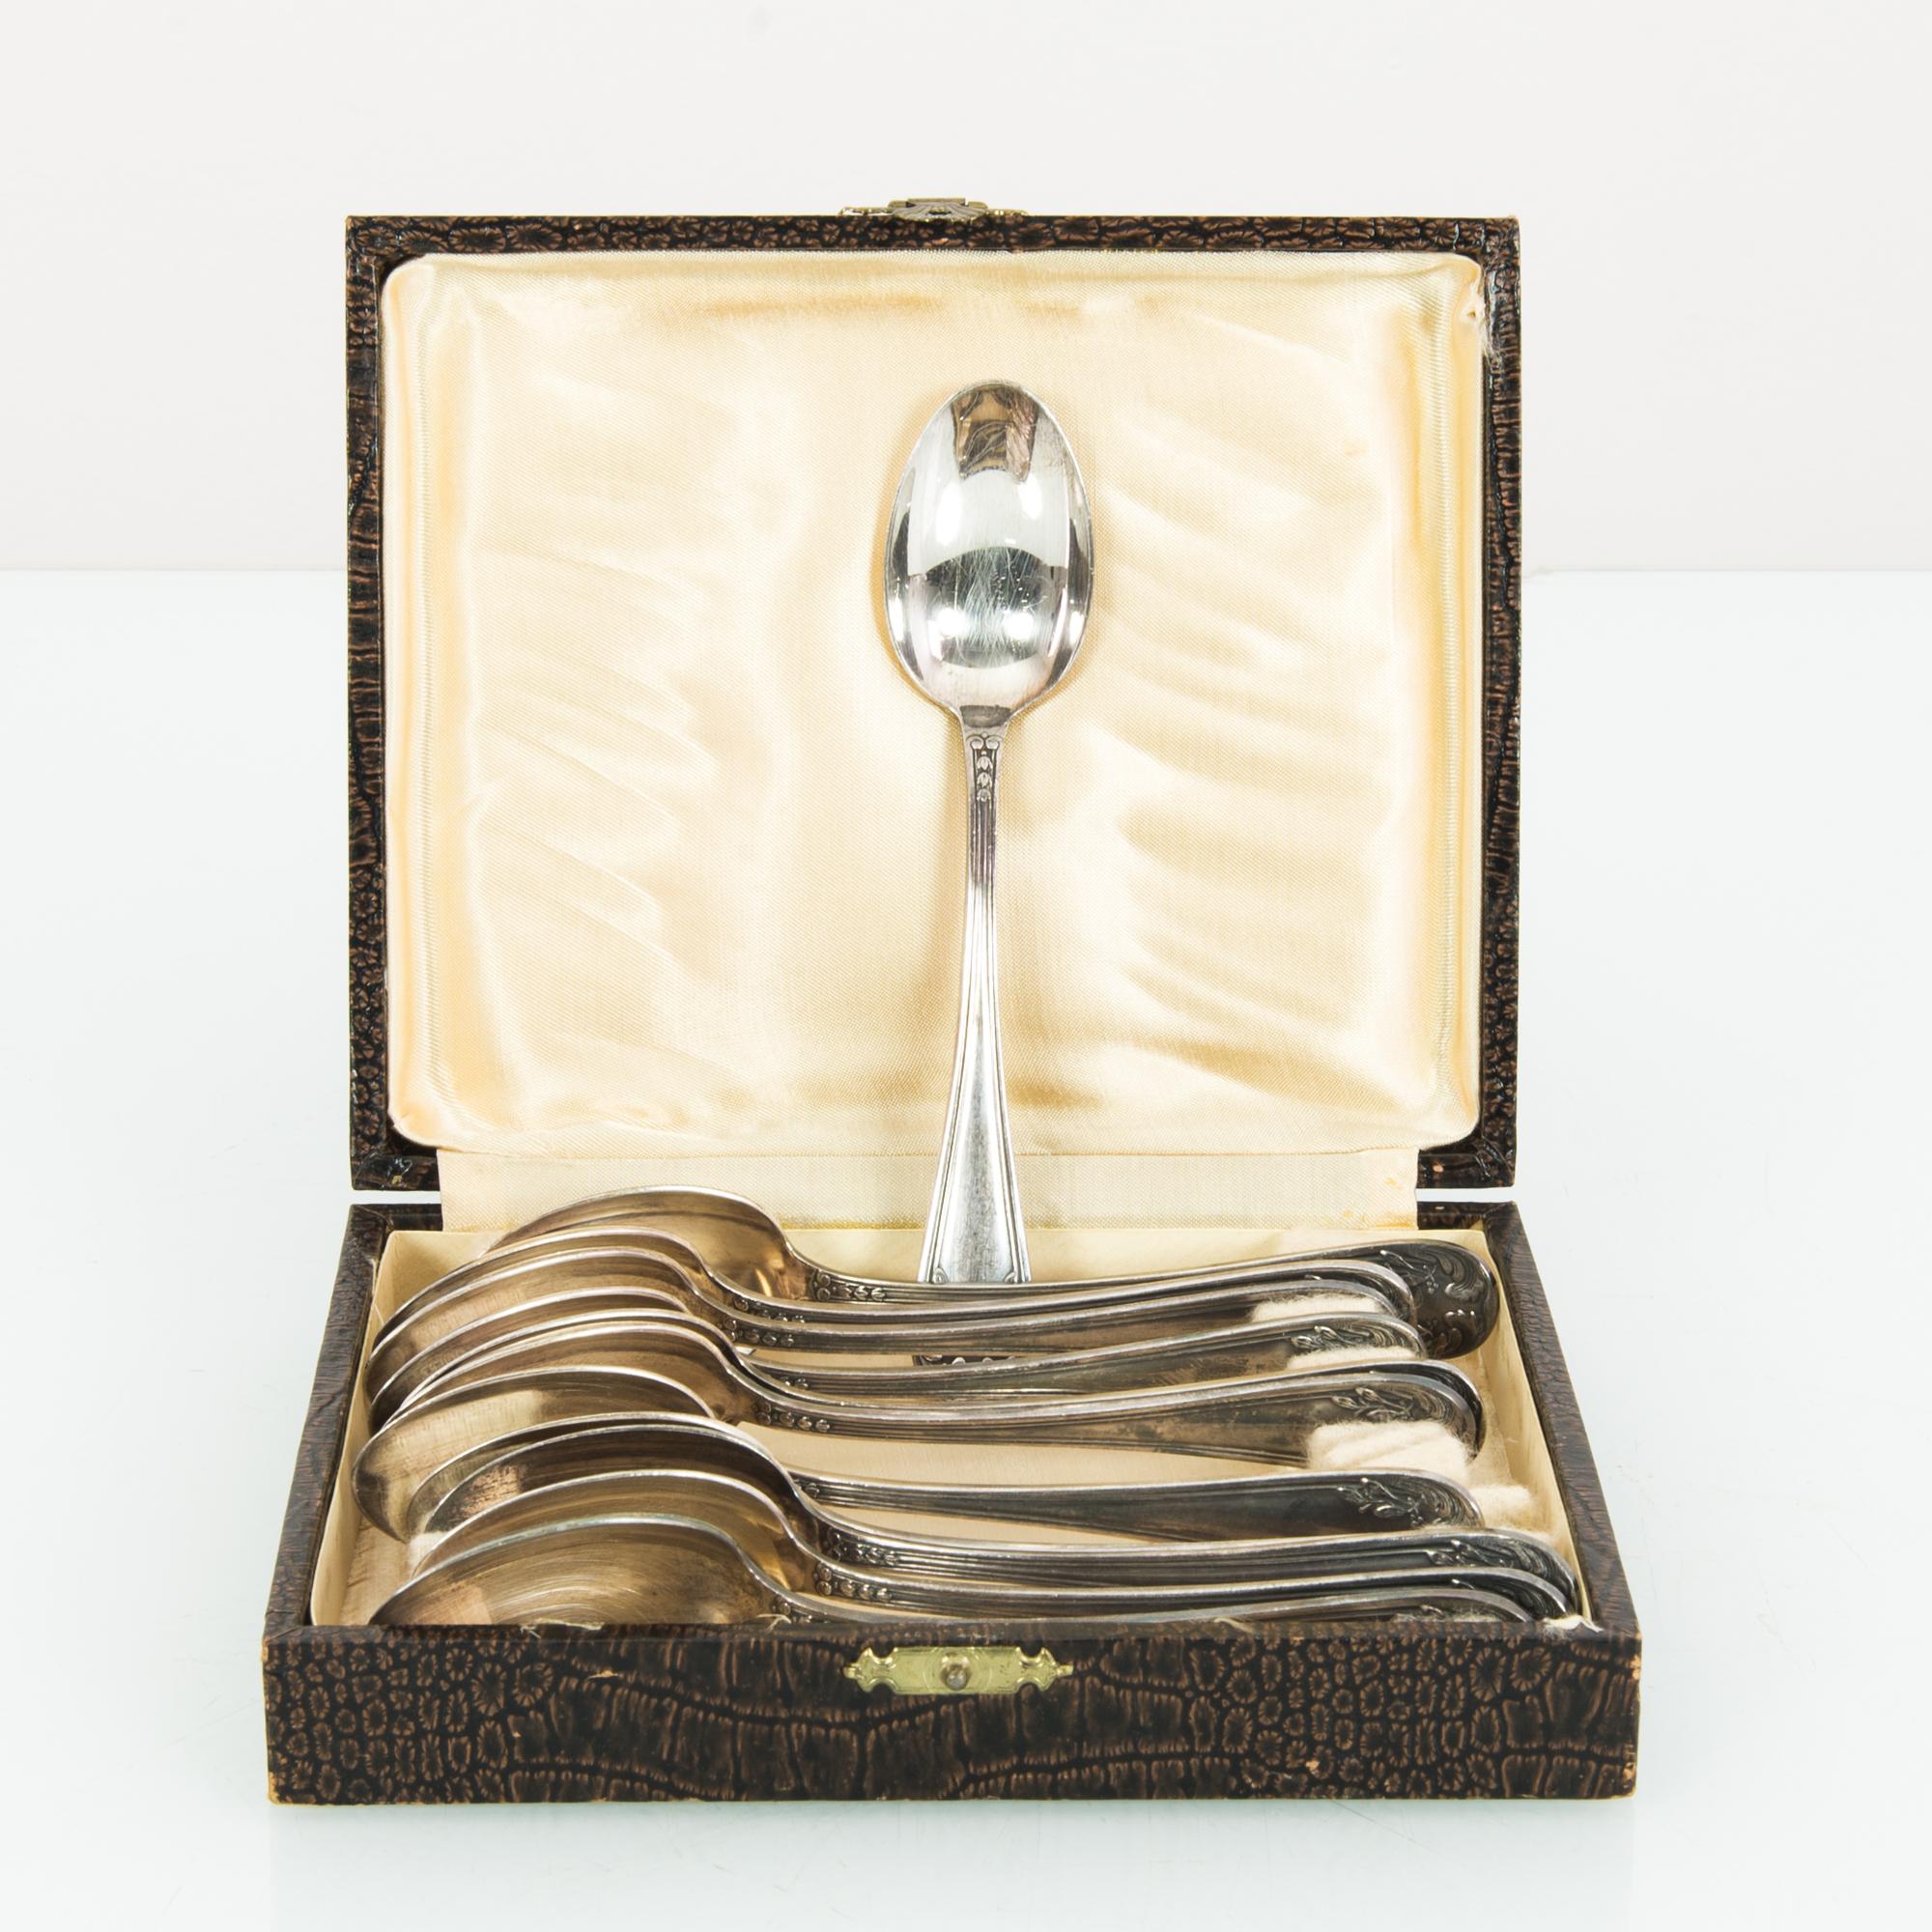 Made in Europe, circa 1920, this set of twelve silver-plated teaspoons features a bright, silvery sheen with decorative carvings on the handle. They can be stored or displayed in a hinged and lined box, accompanied with an aura of old-world